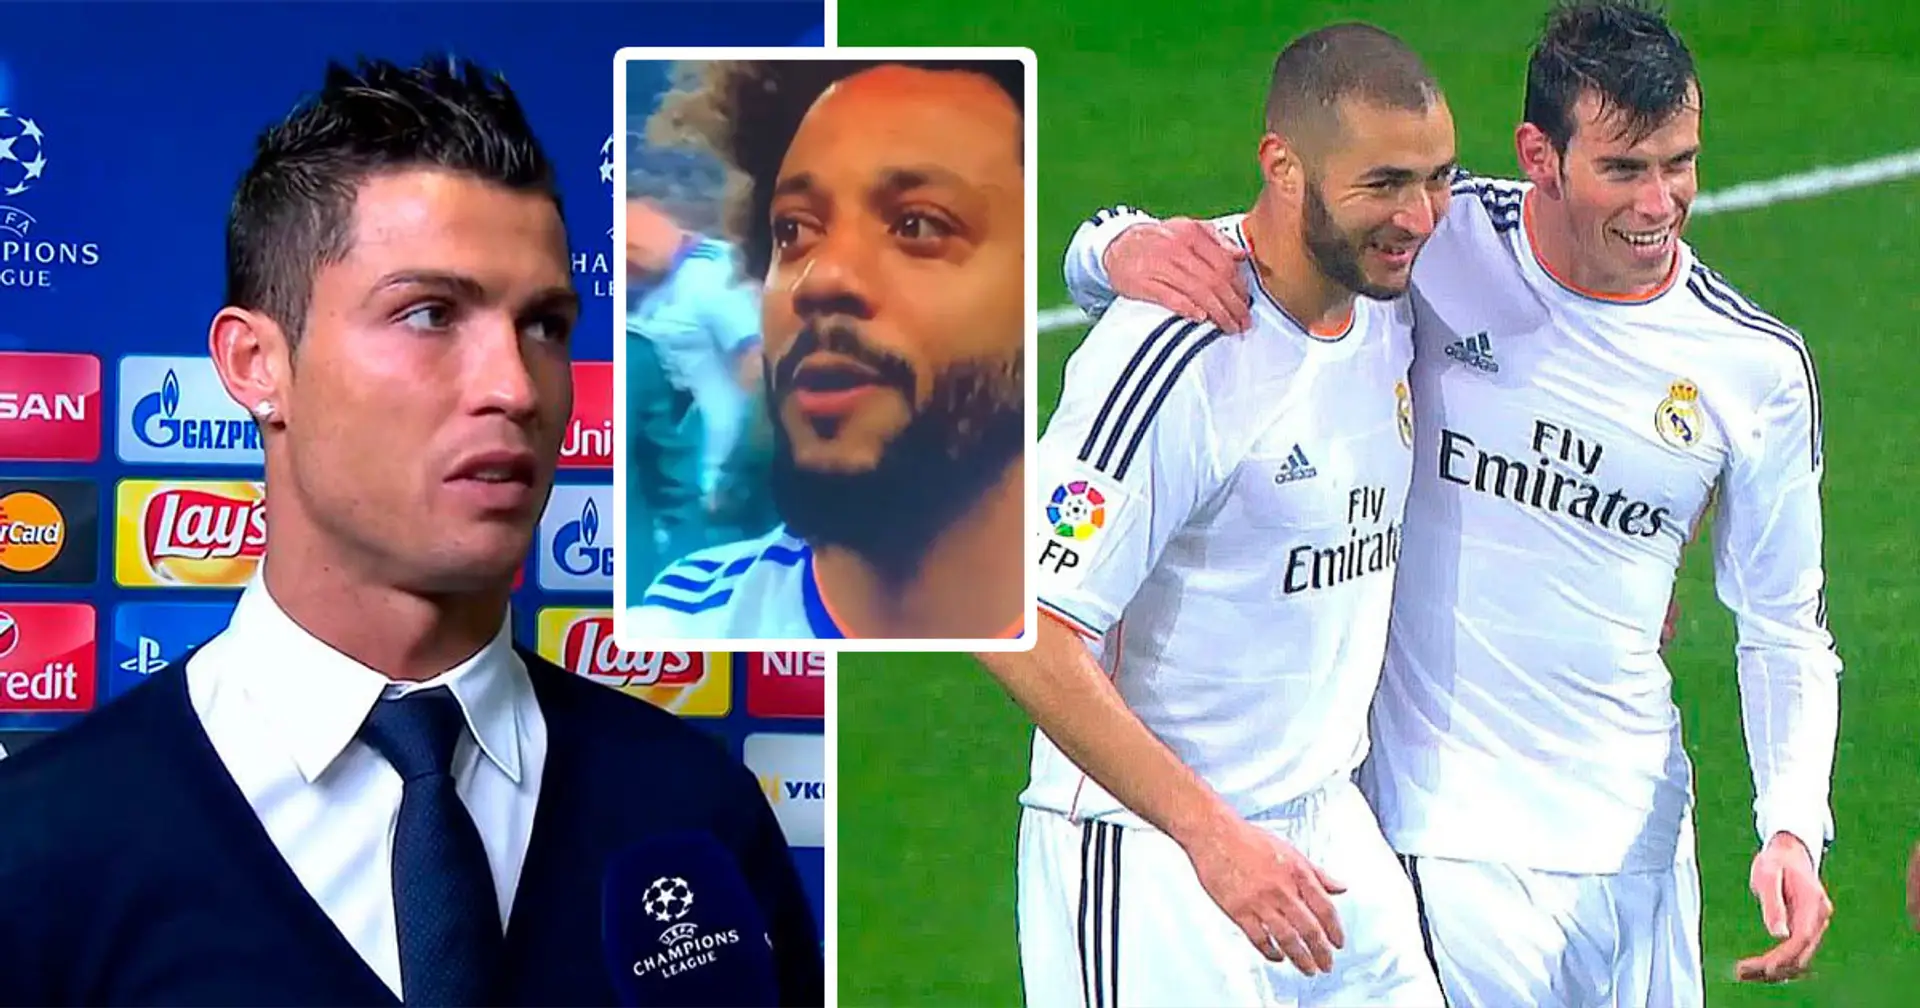 'If teammates were on my level, Real Madrid would be top': Recalling what Ronaldo said about his teammates after losing Madrid derby